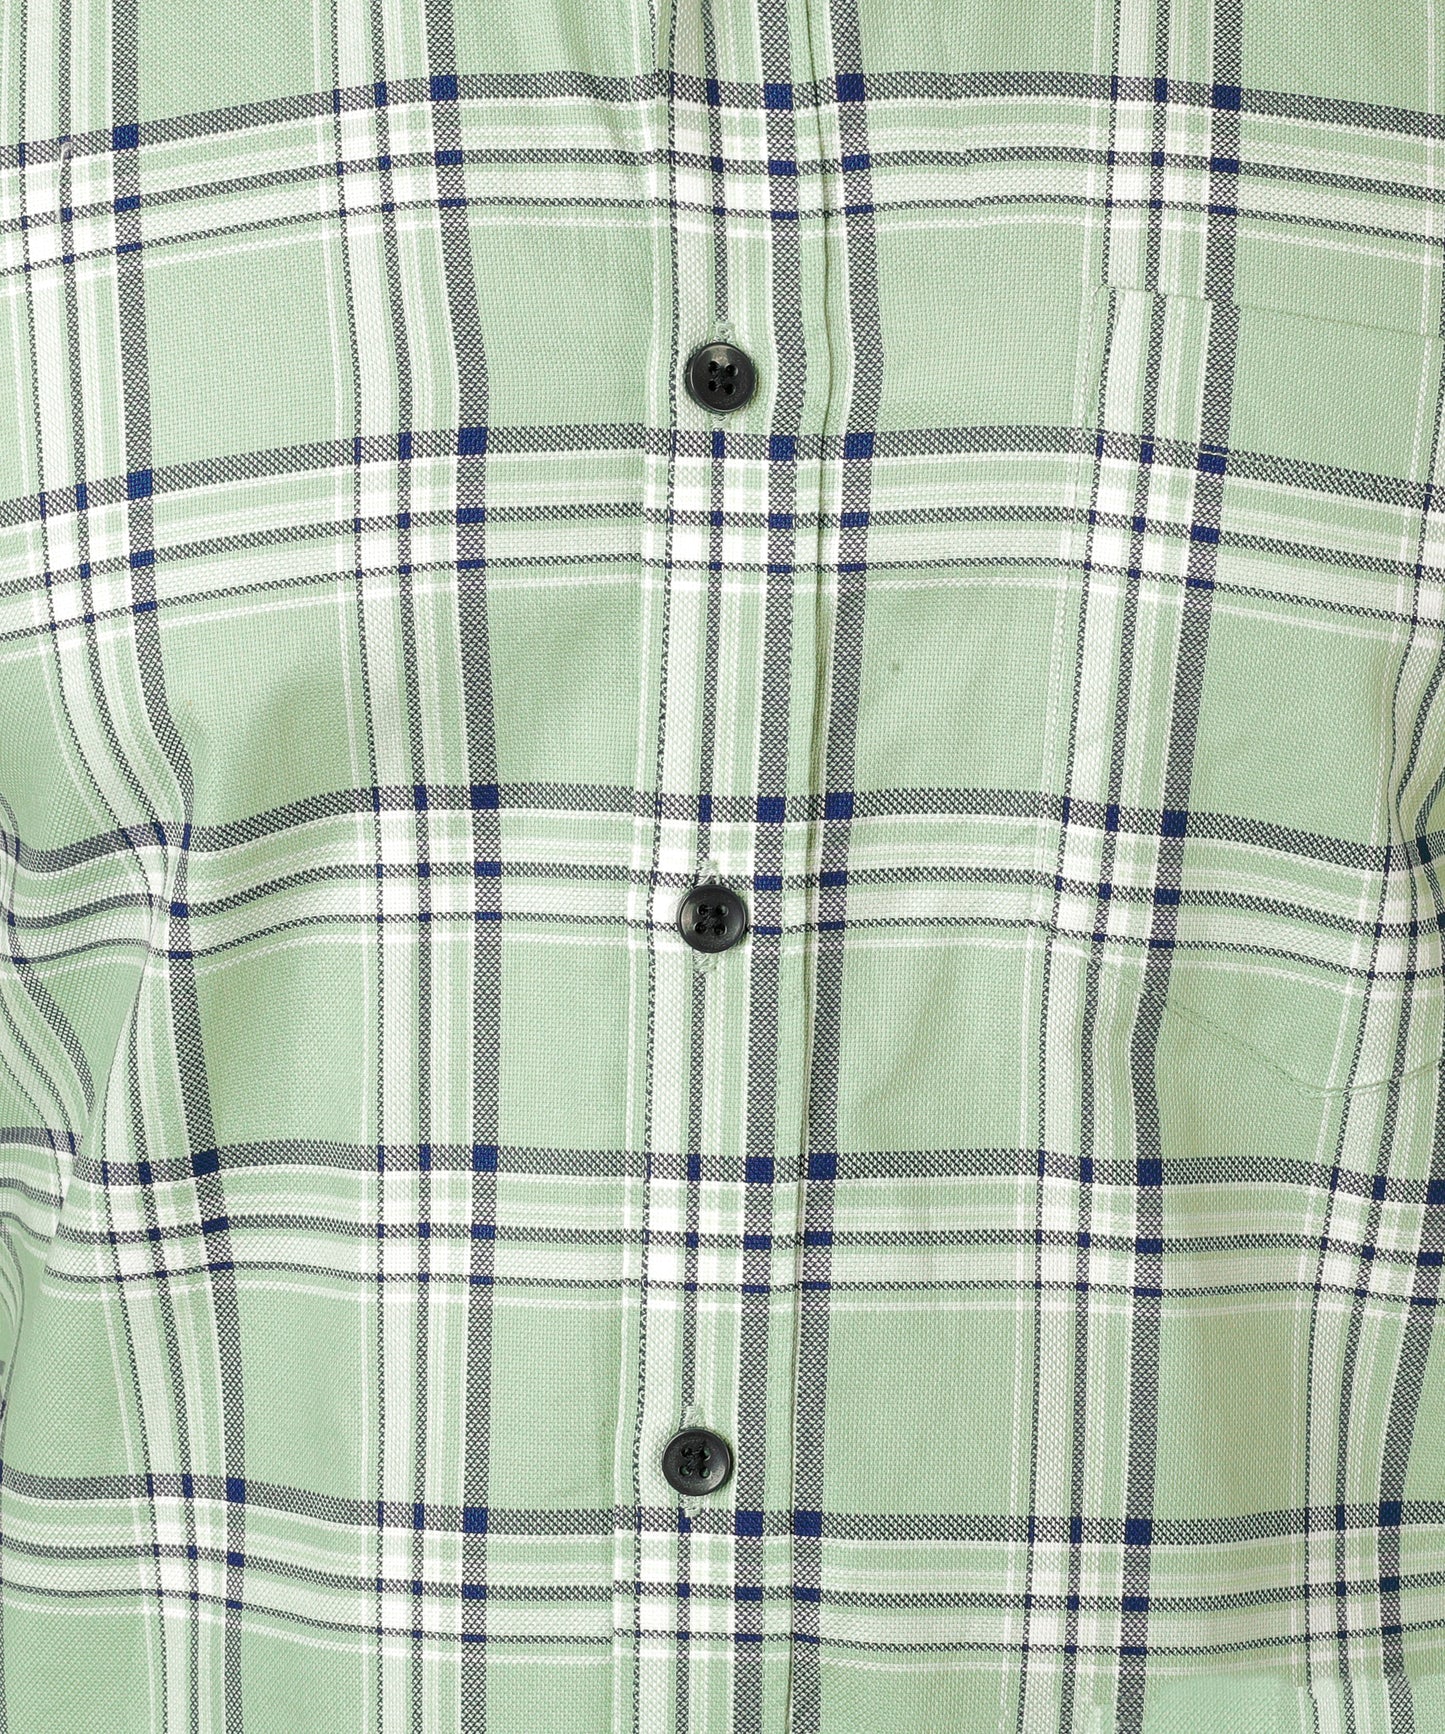 5thanfold Men's Casual Pure Cotton Full Sleeve Checkered Pista green Slim Fit Shirt